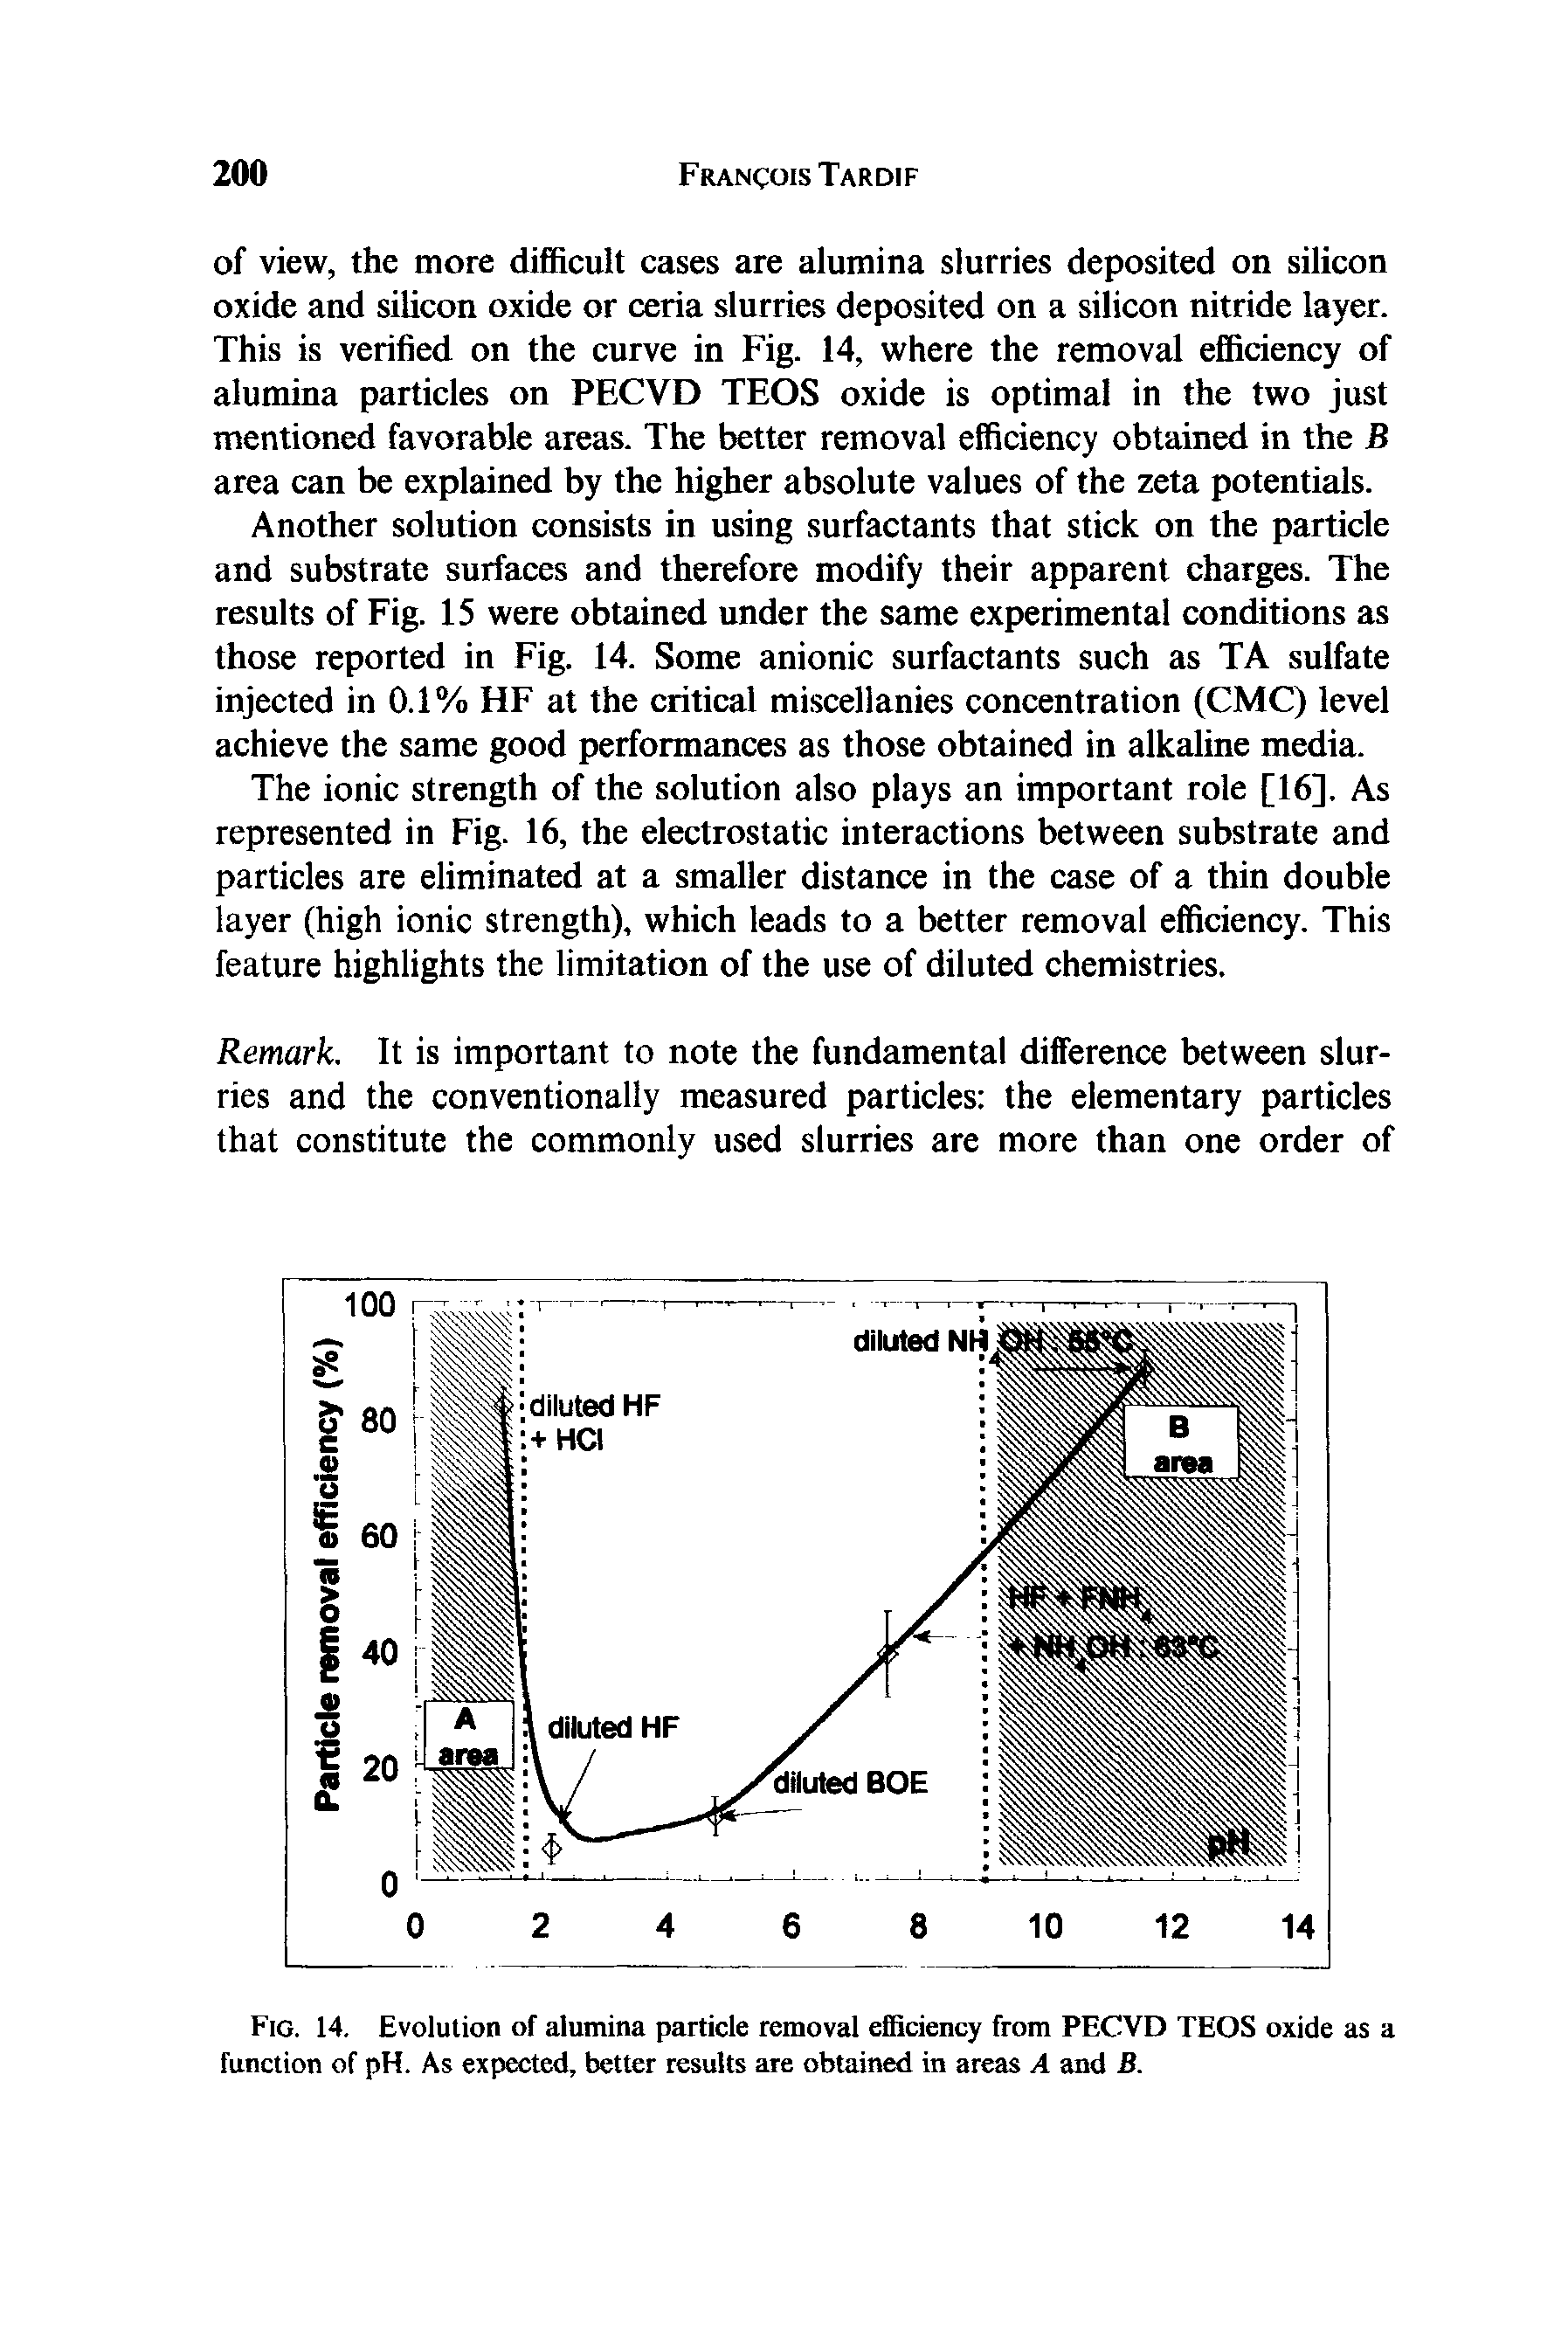 Fig. 14. Evolution of alumina particle removal efficiency from PECVD TEOS oxide as a function of pH. As expected, better results are obtained in areas A and B.